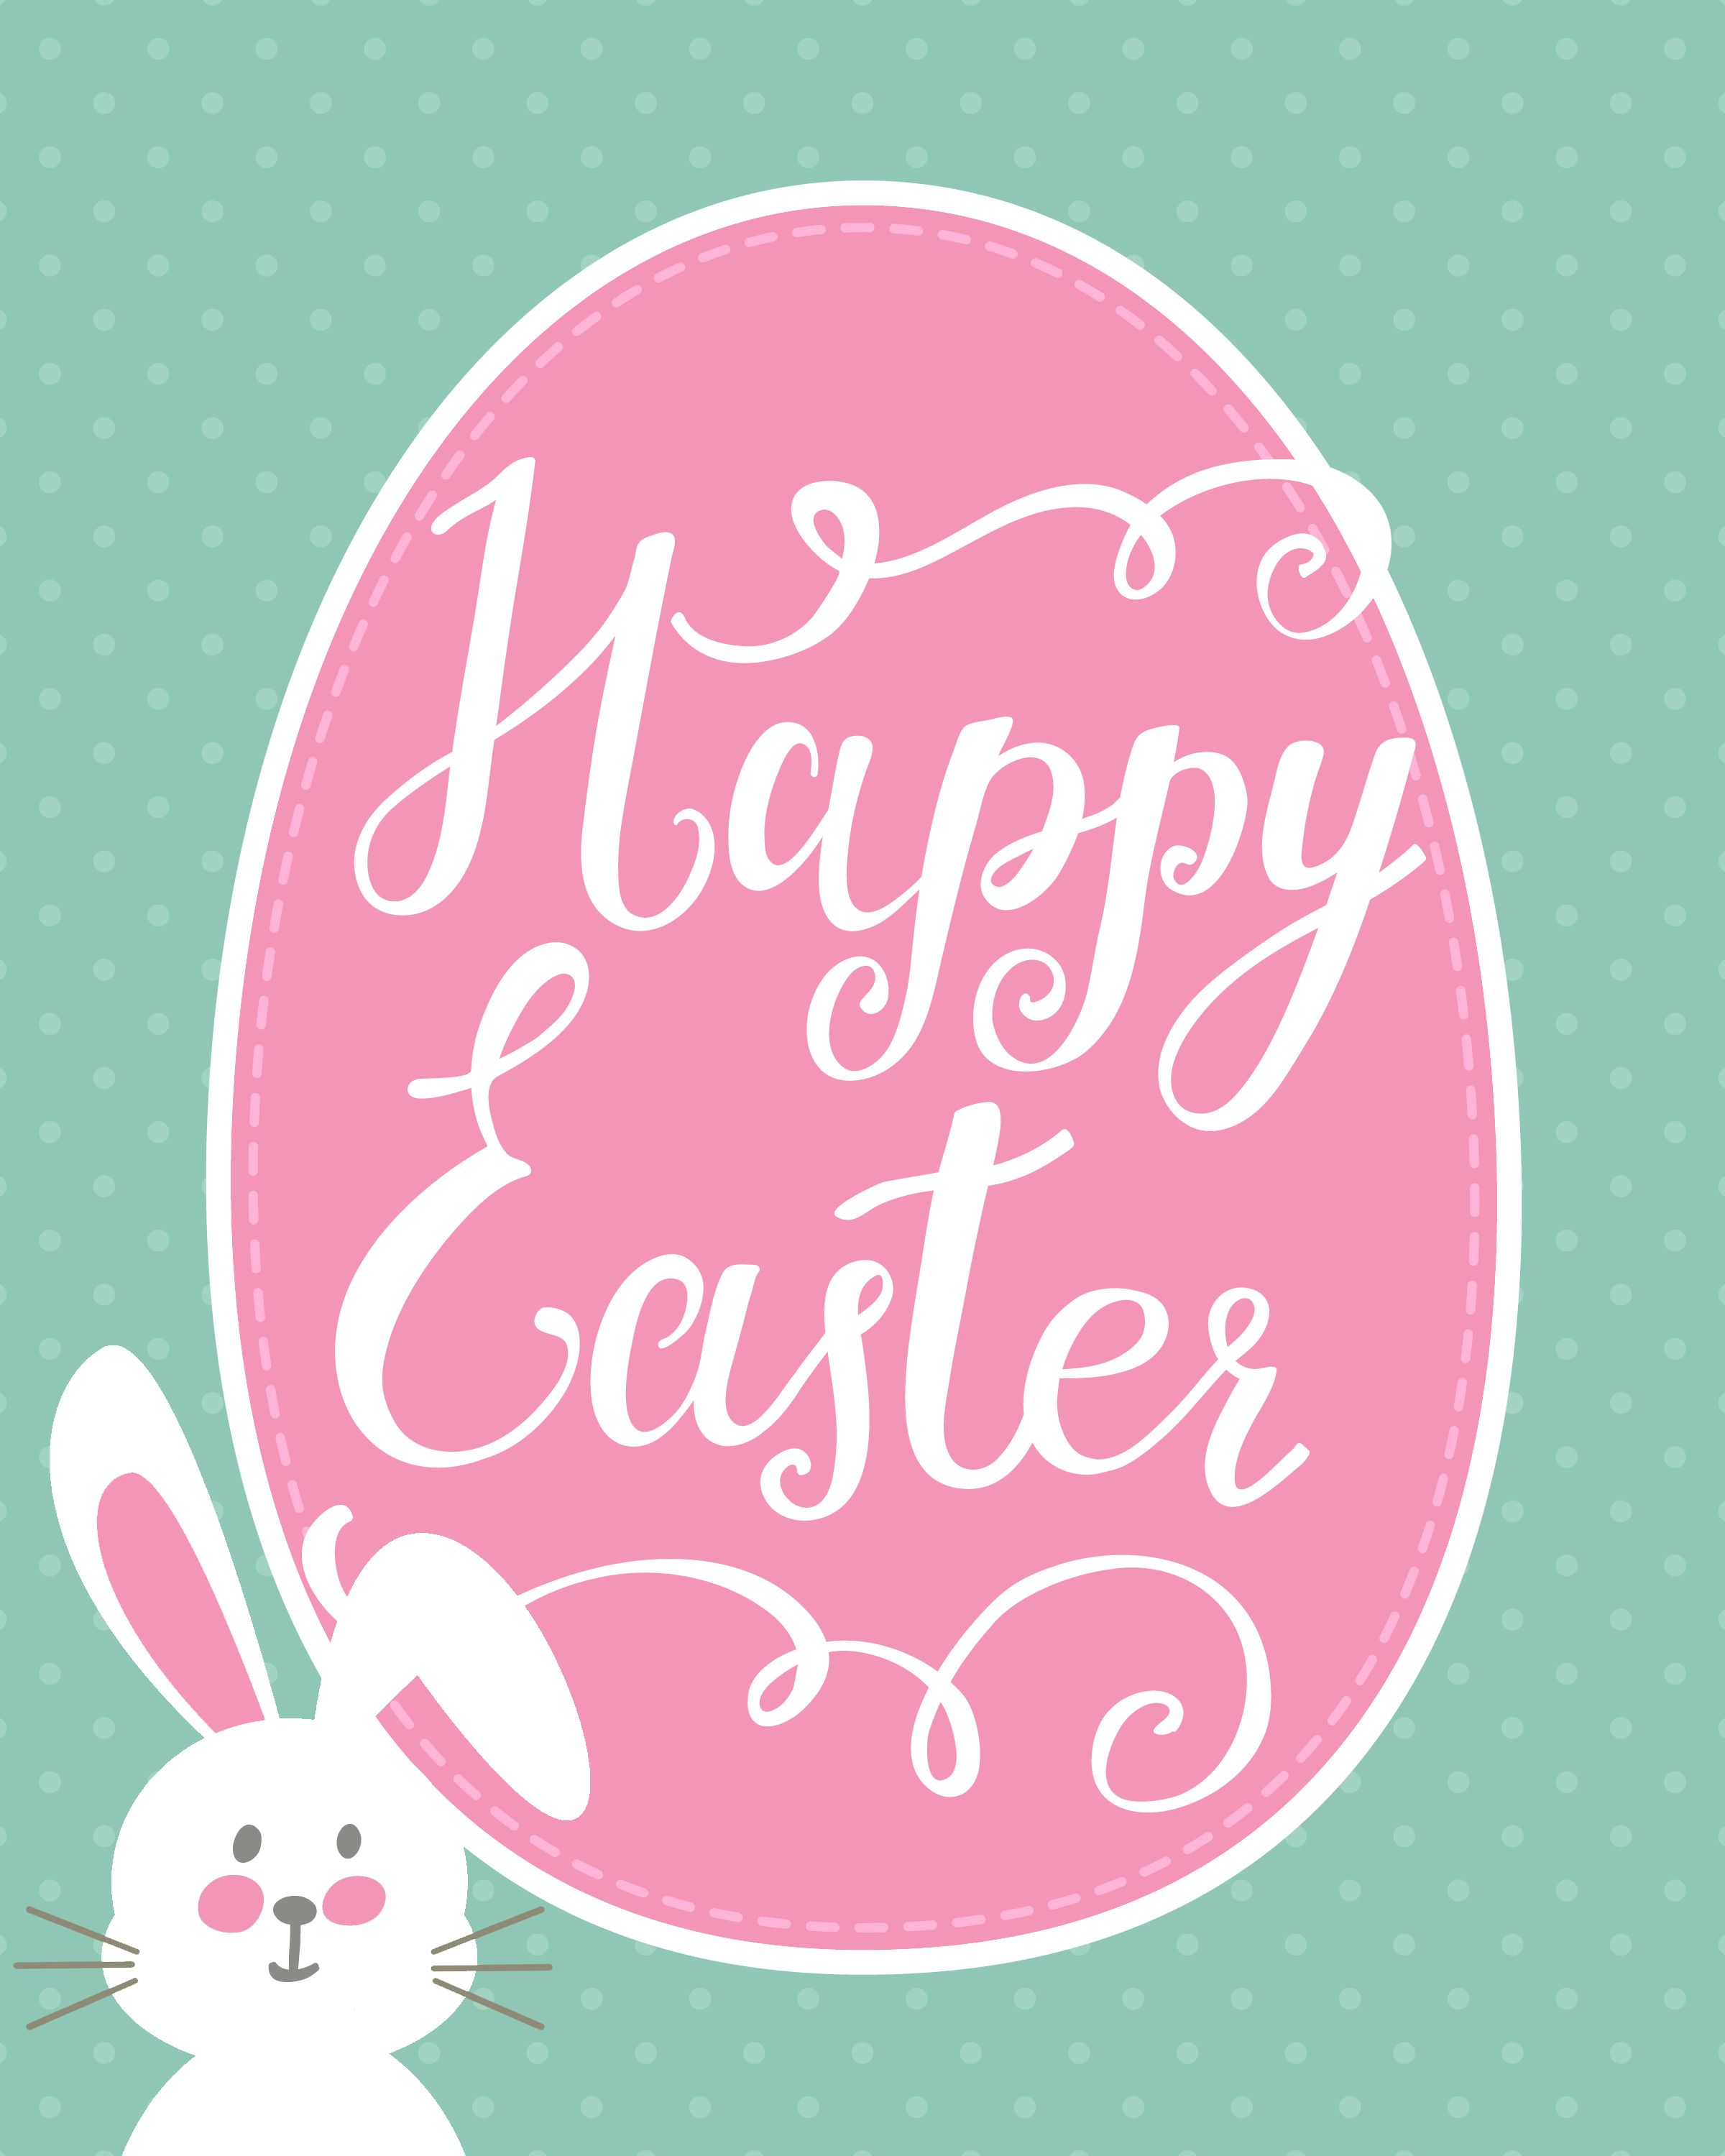 Religious Happy Easter Images 2019 Free Download Happy Easter